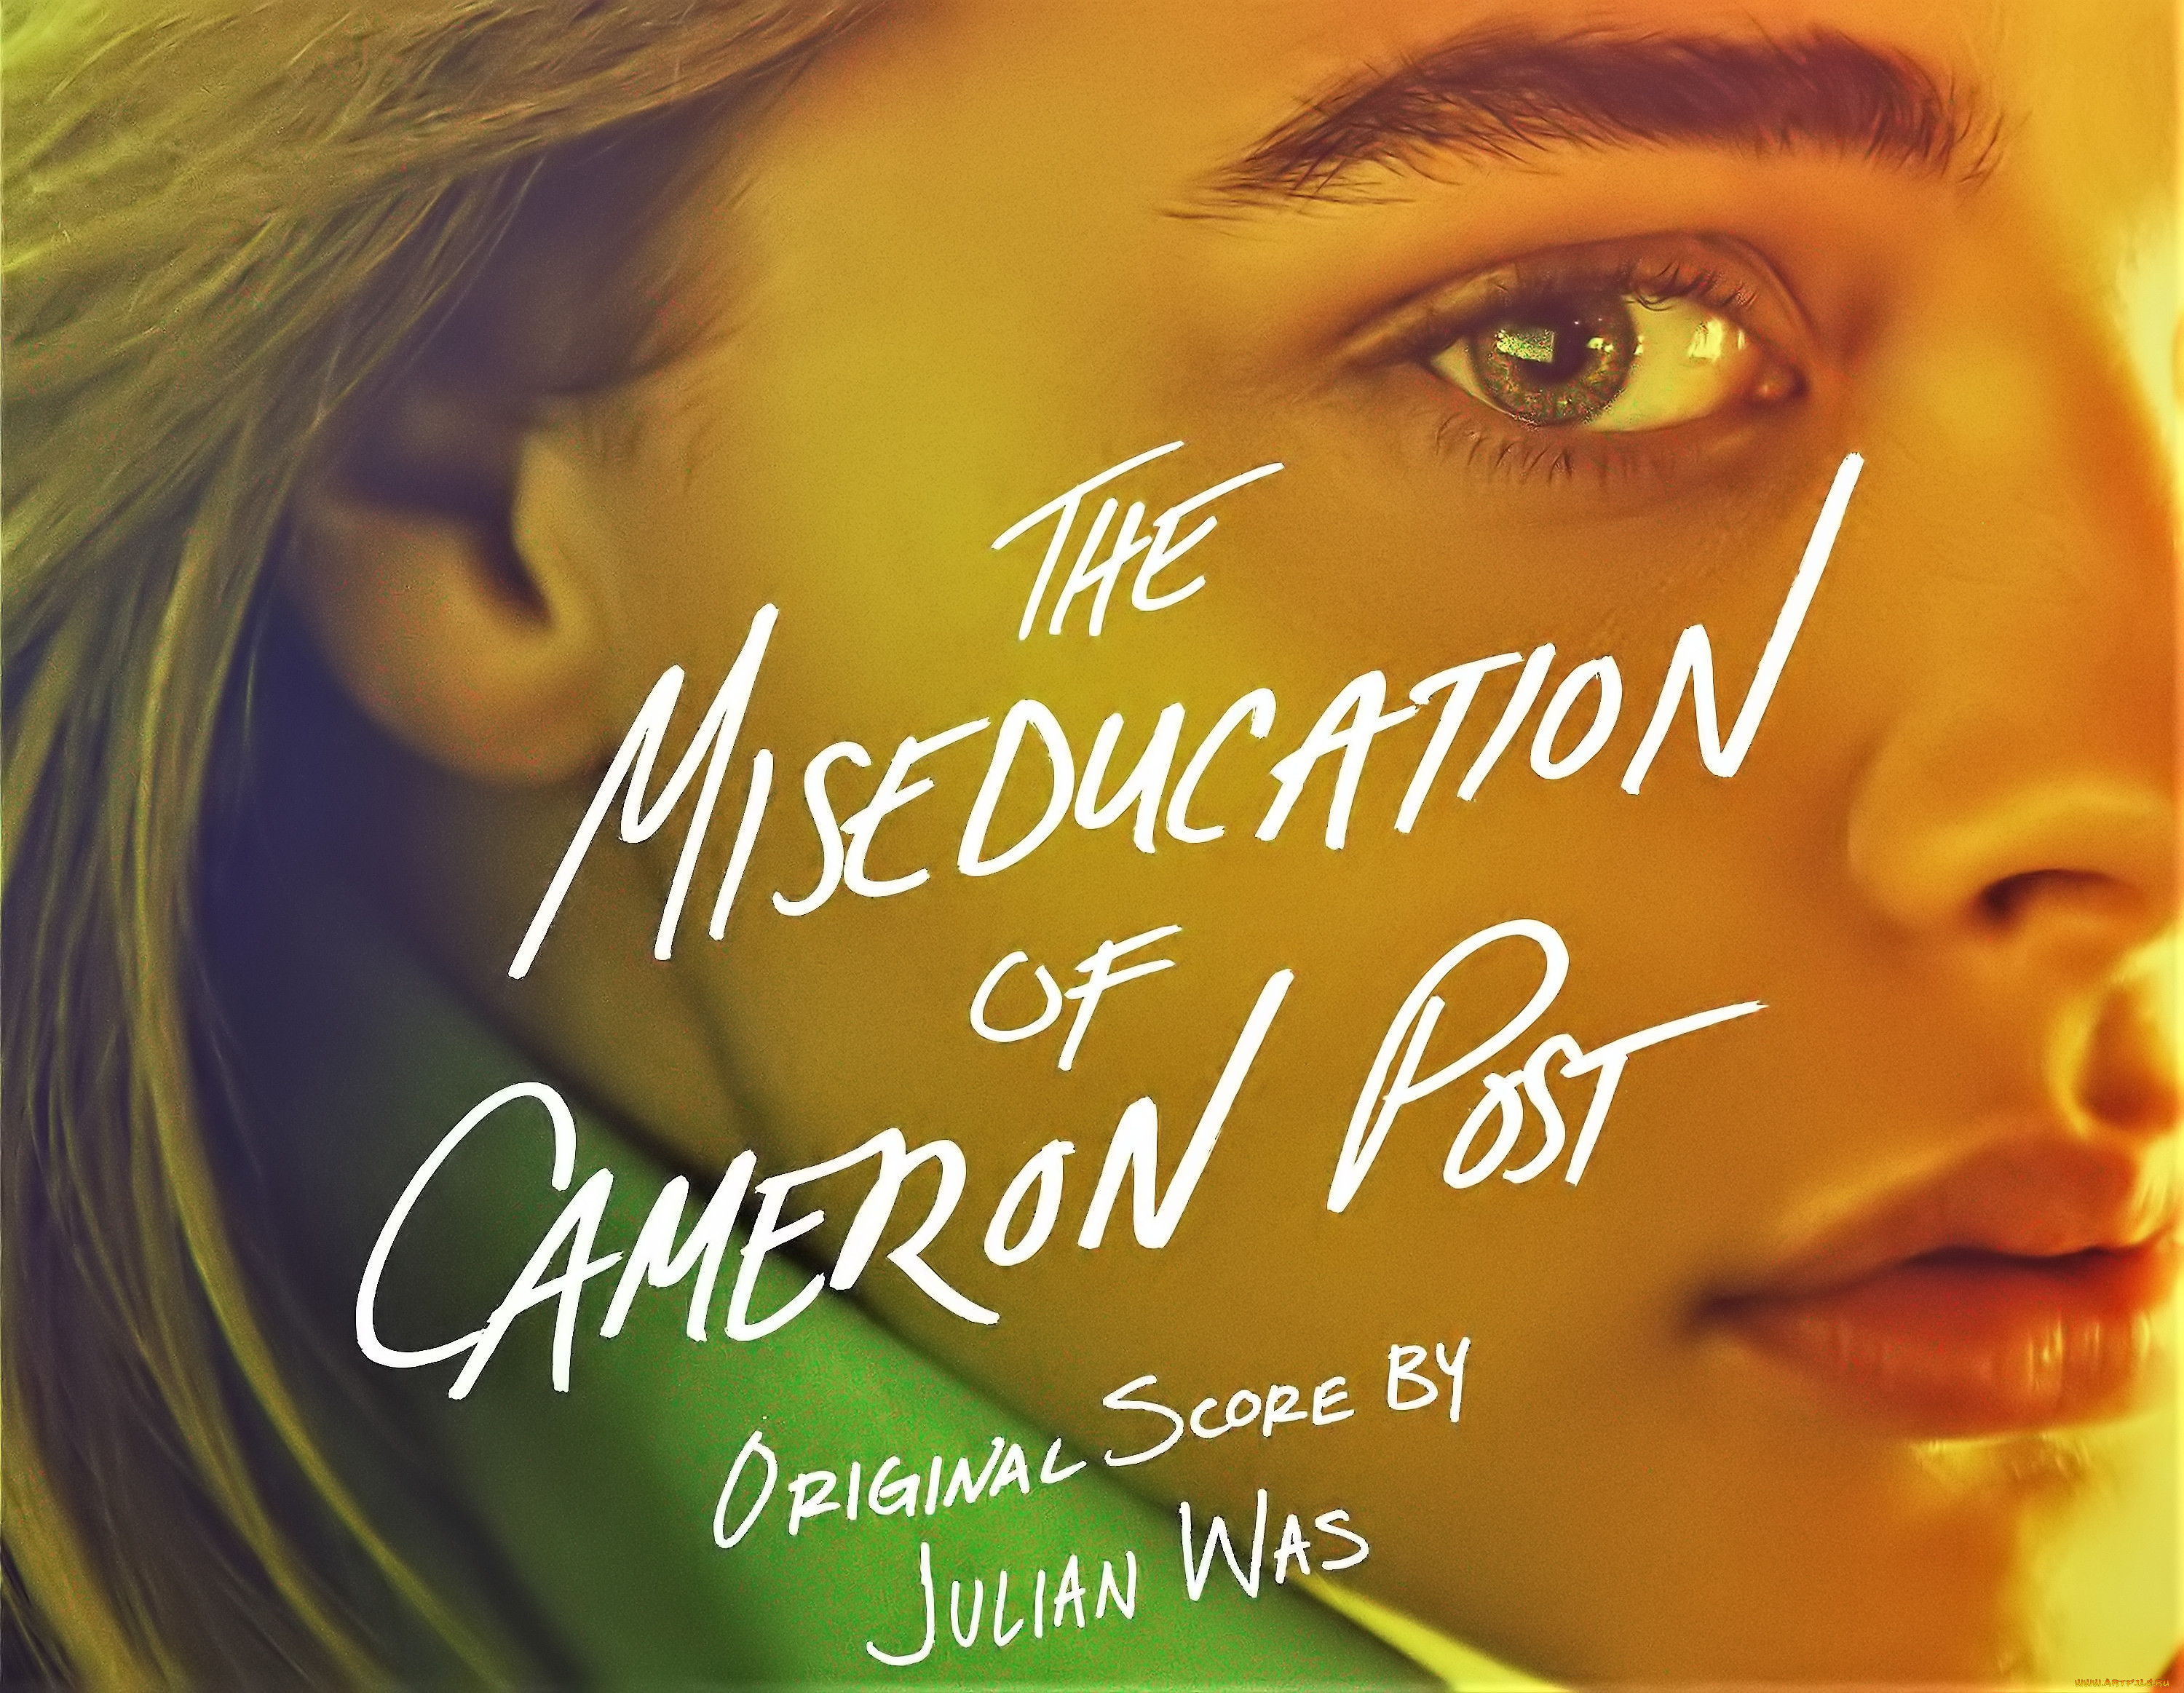  , the miseducation of cameron post, , 